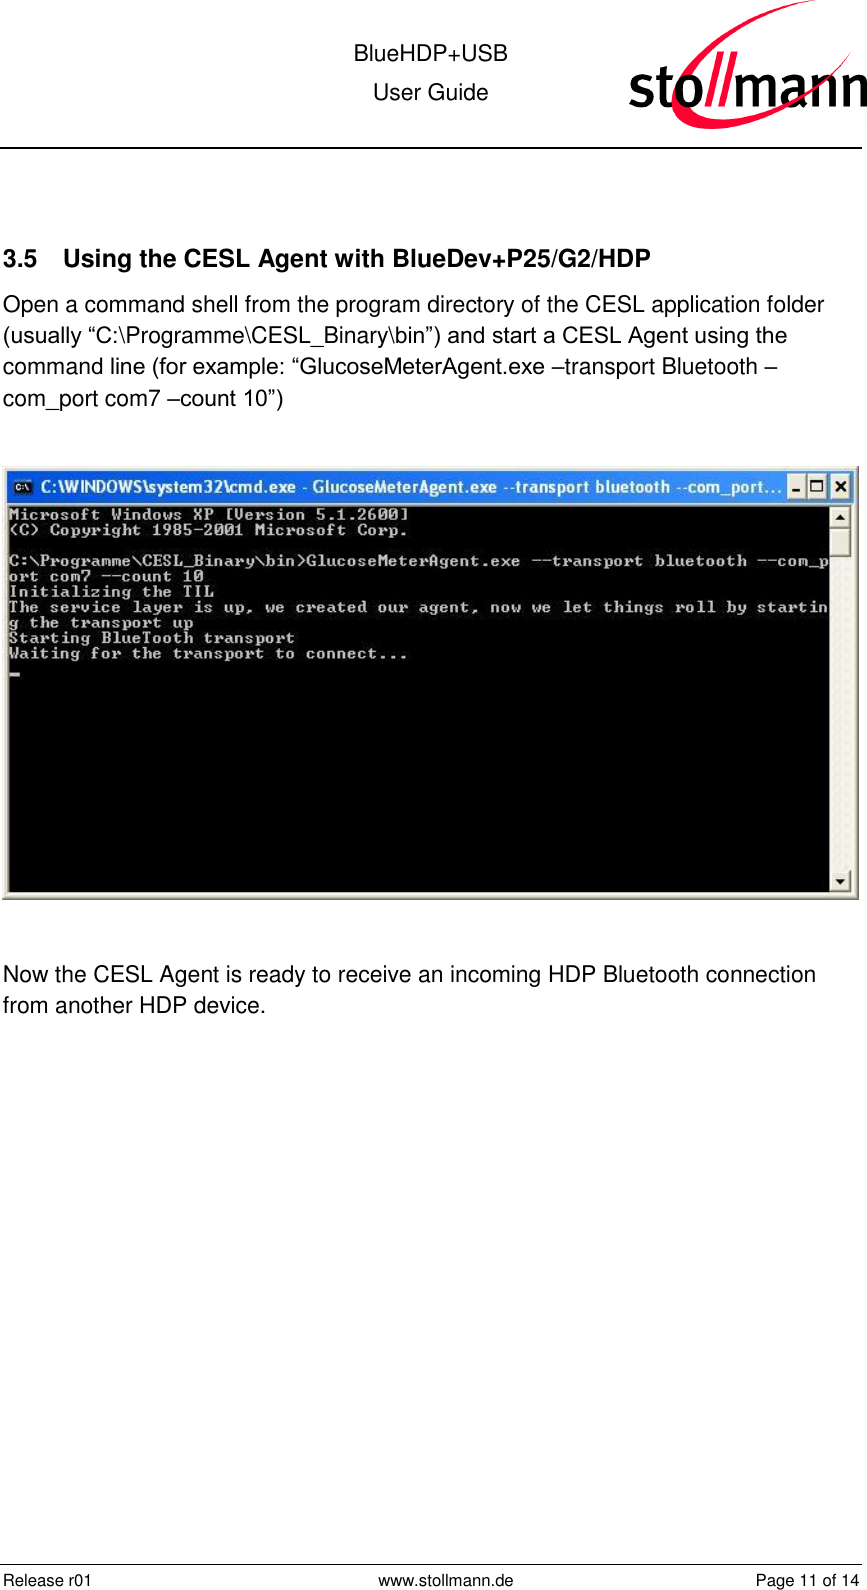  BlueHDP+USB User Guide  Release r01  www.stollmann.de  Page 11 of 14   3.5  Using the CESL Agent with BlueDev+P25/G2/HDP Open a command shell from the program directory of the CESL application folder (usually “C:\Programme\CESL_Binary\bin”) and start a CESL Agent using the command line (for example: “GlucoseMeterAgent.exe –transport Bluetooth –com_port com7 –count 10”)    Now the CESL Agent is ready to receive an incoming HDP Bluetooth connection from another HDP device.  